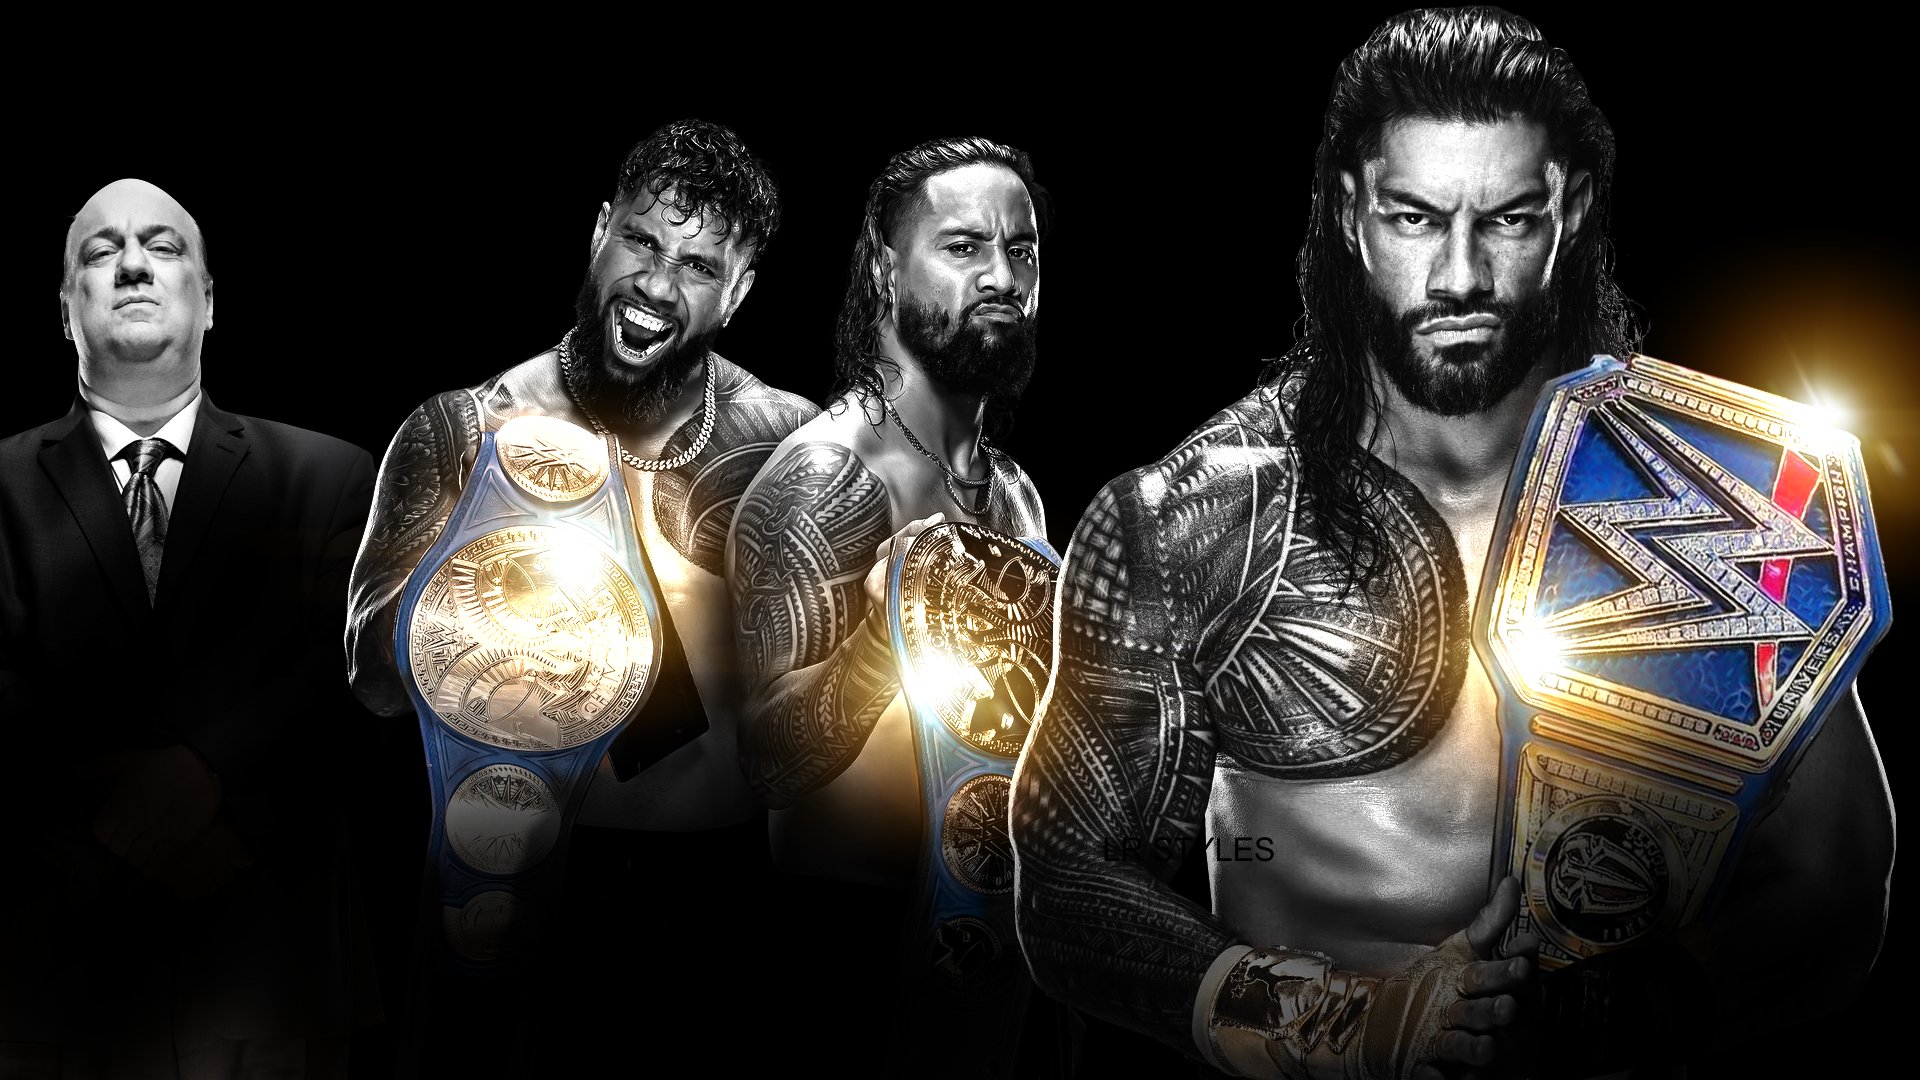 Lucio Rodrigues - #NewHeaderPic The Bloodline (Roman Reigns, The Usos and Paul Heyman) #WWE #SmackDown